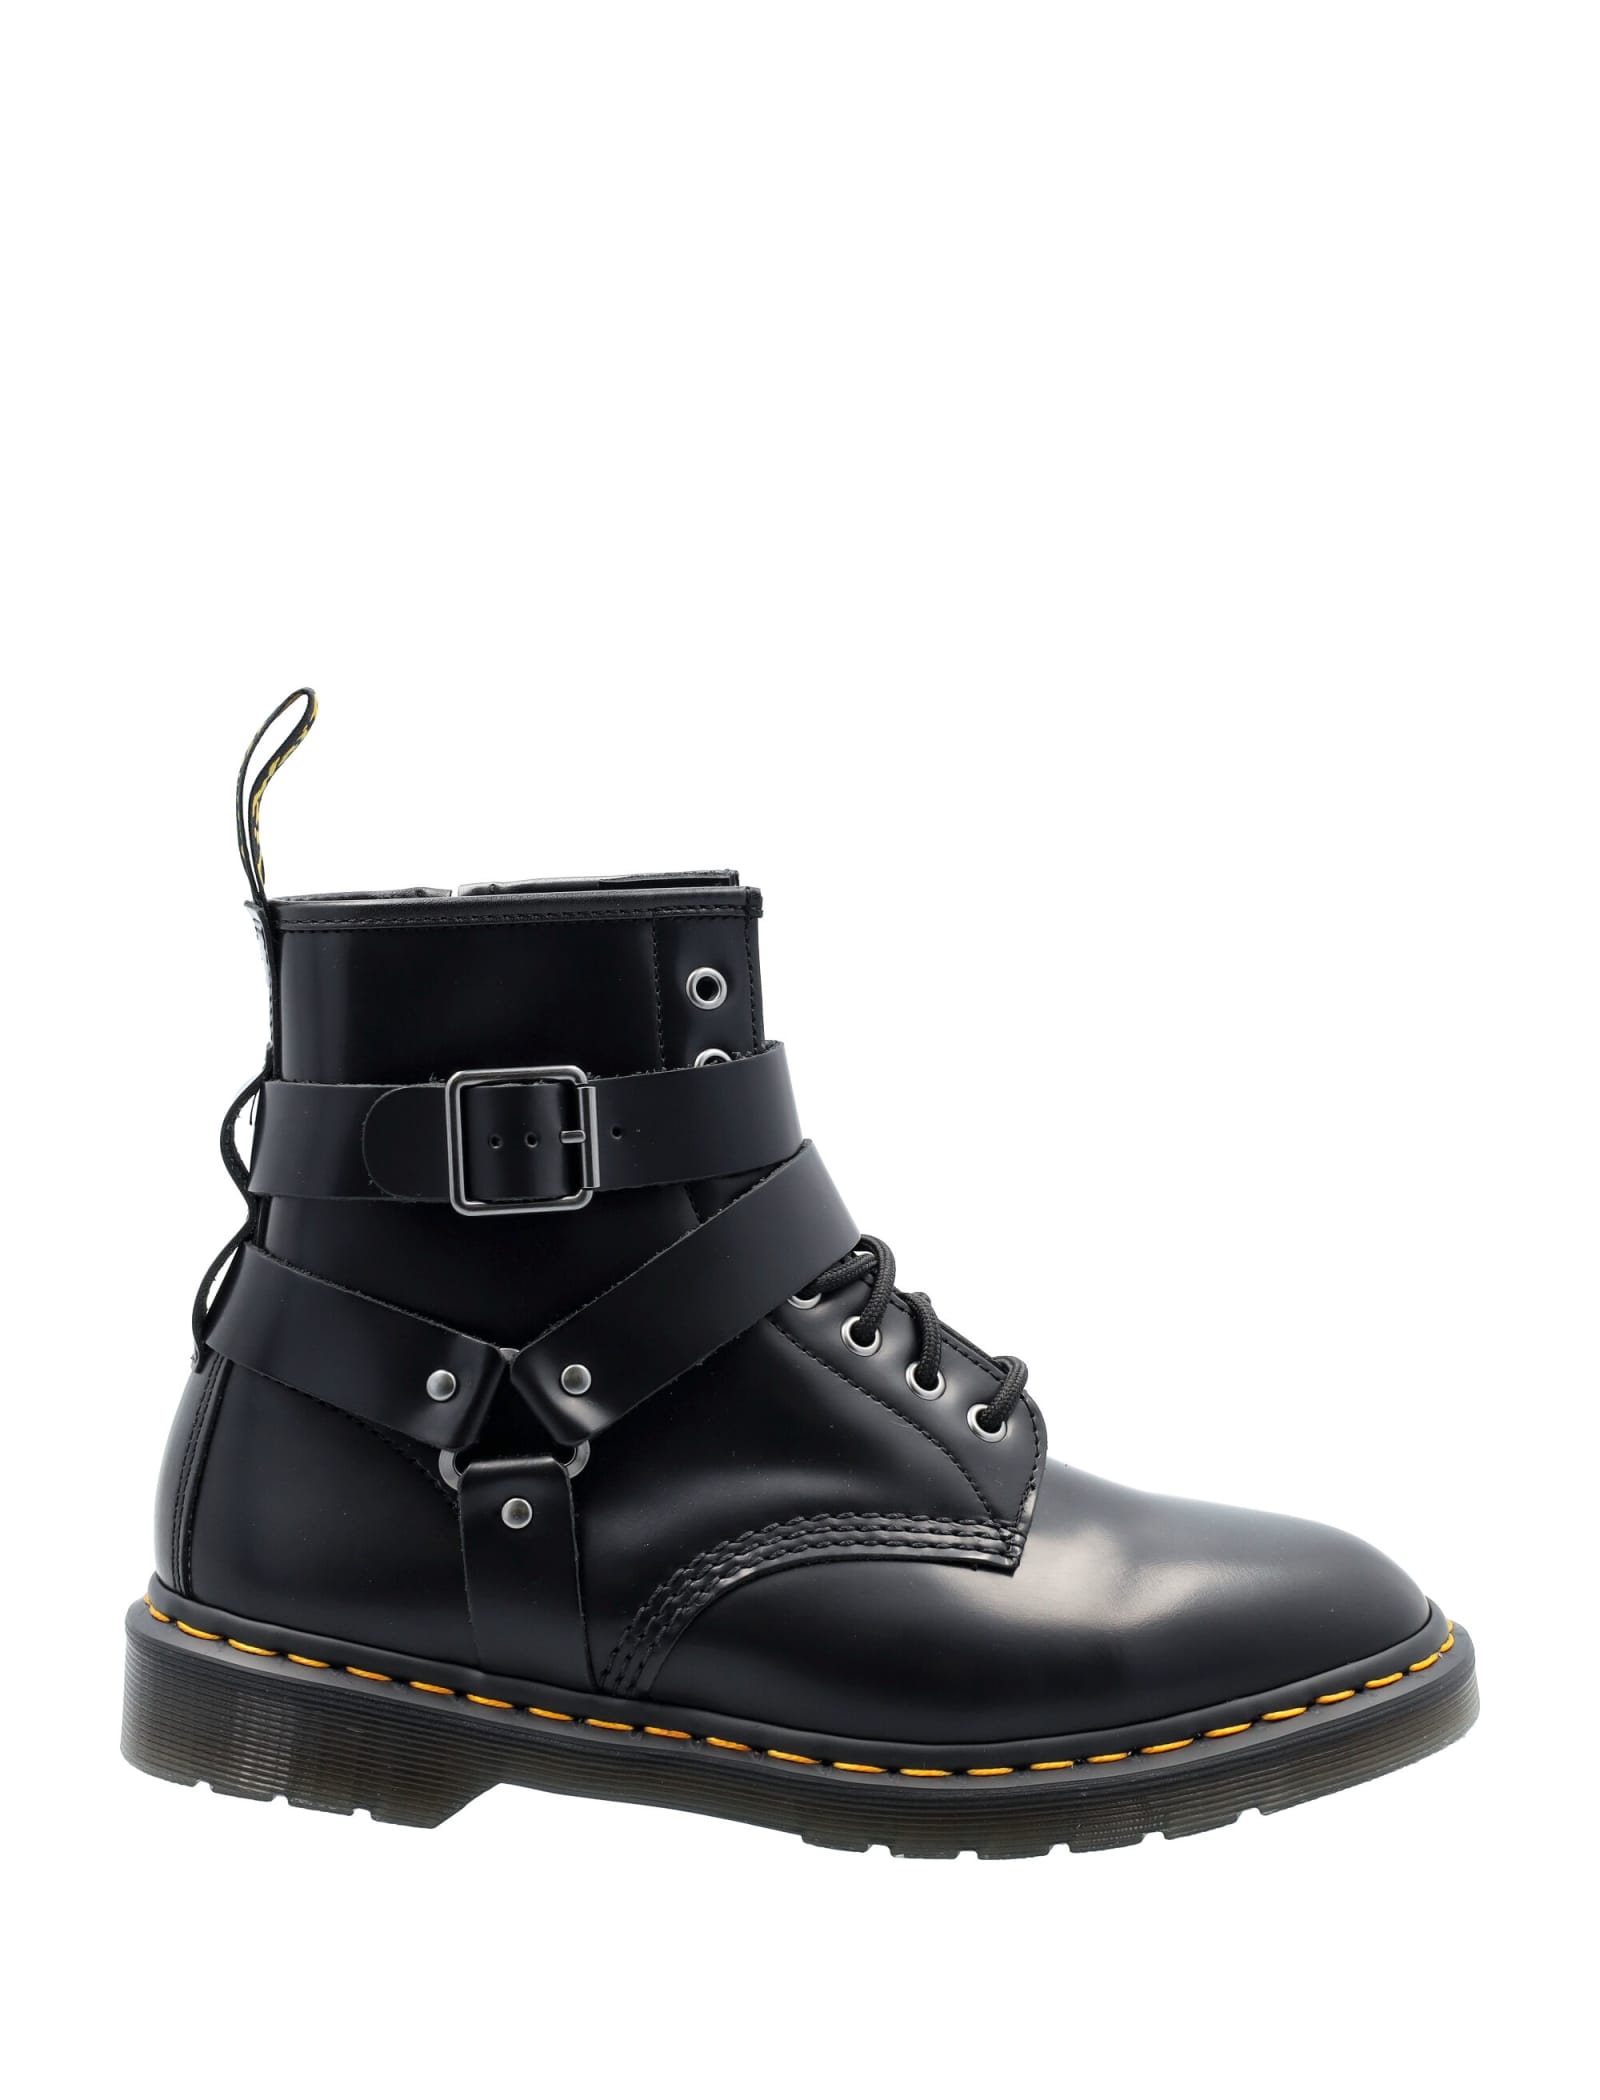 Dr. Martens Cristofer Leather Harness Lace Up Boots